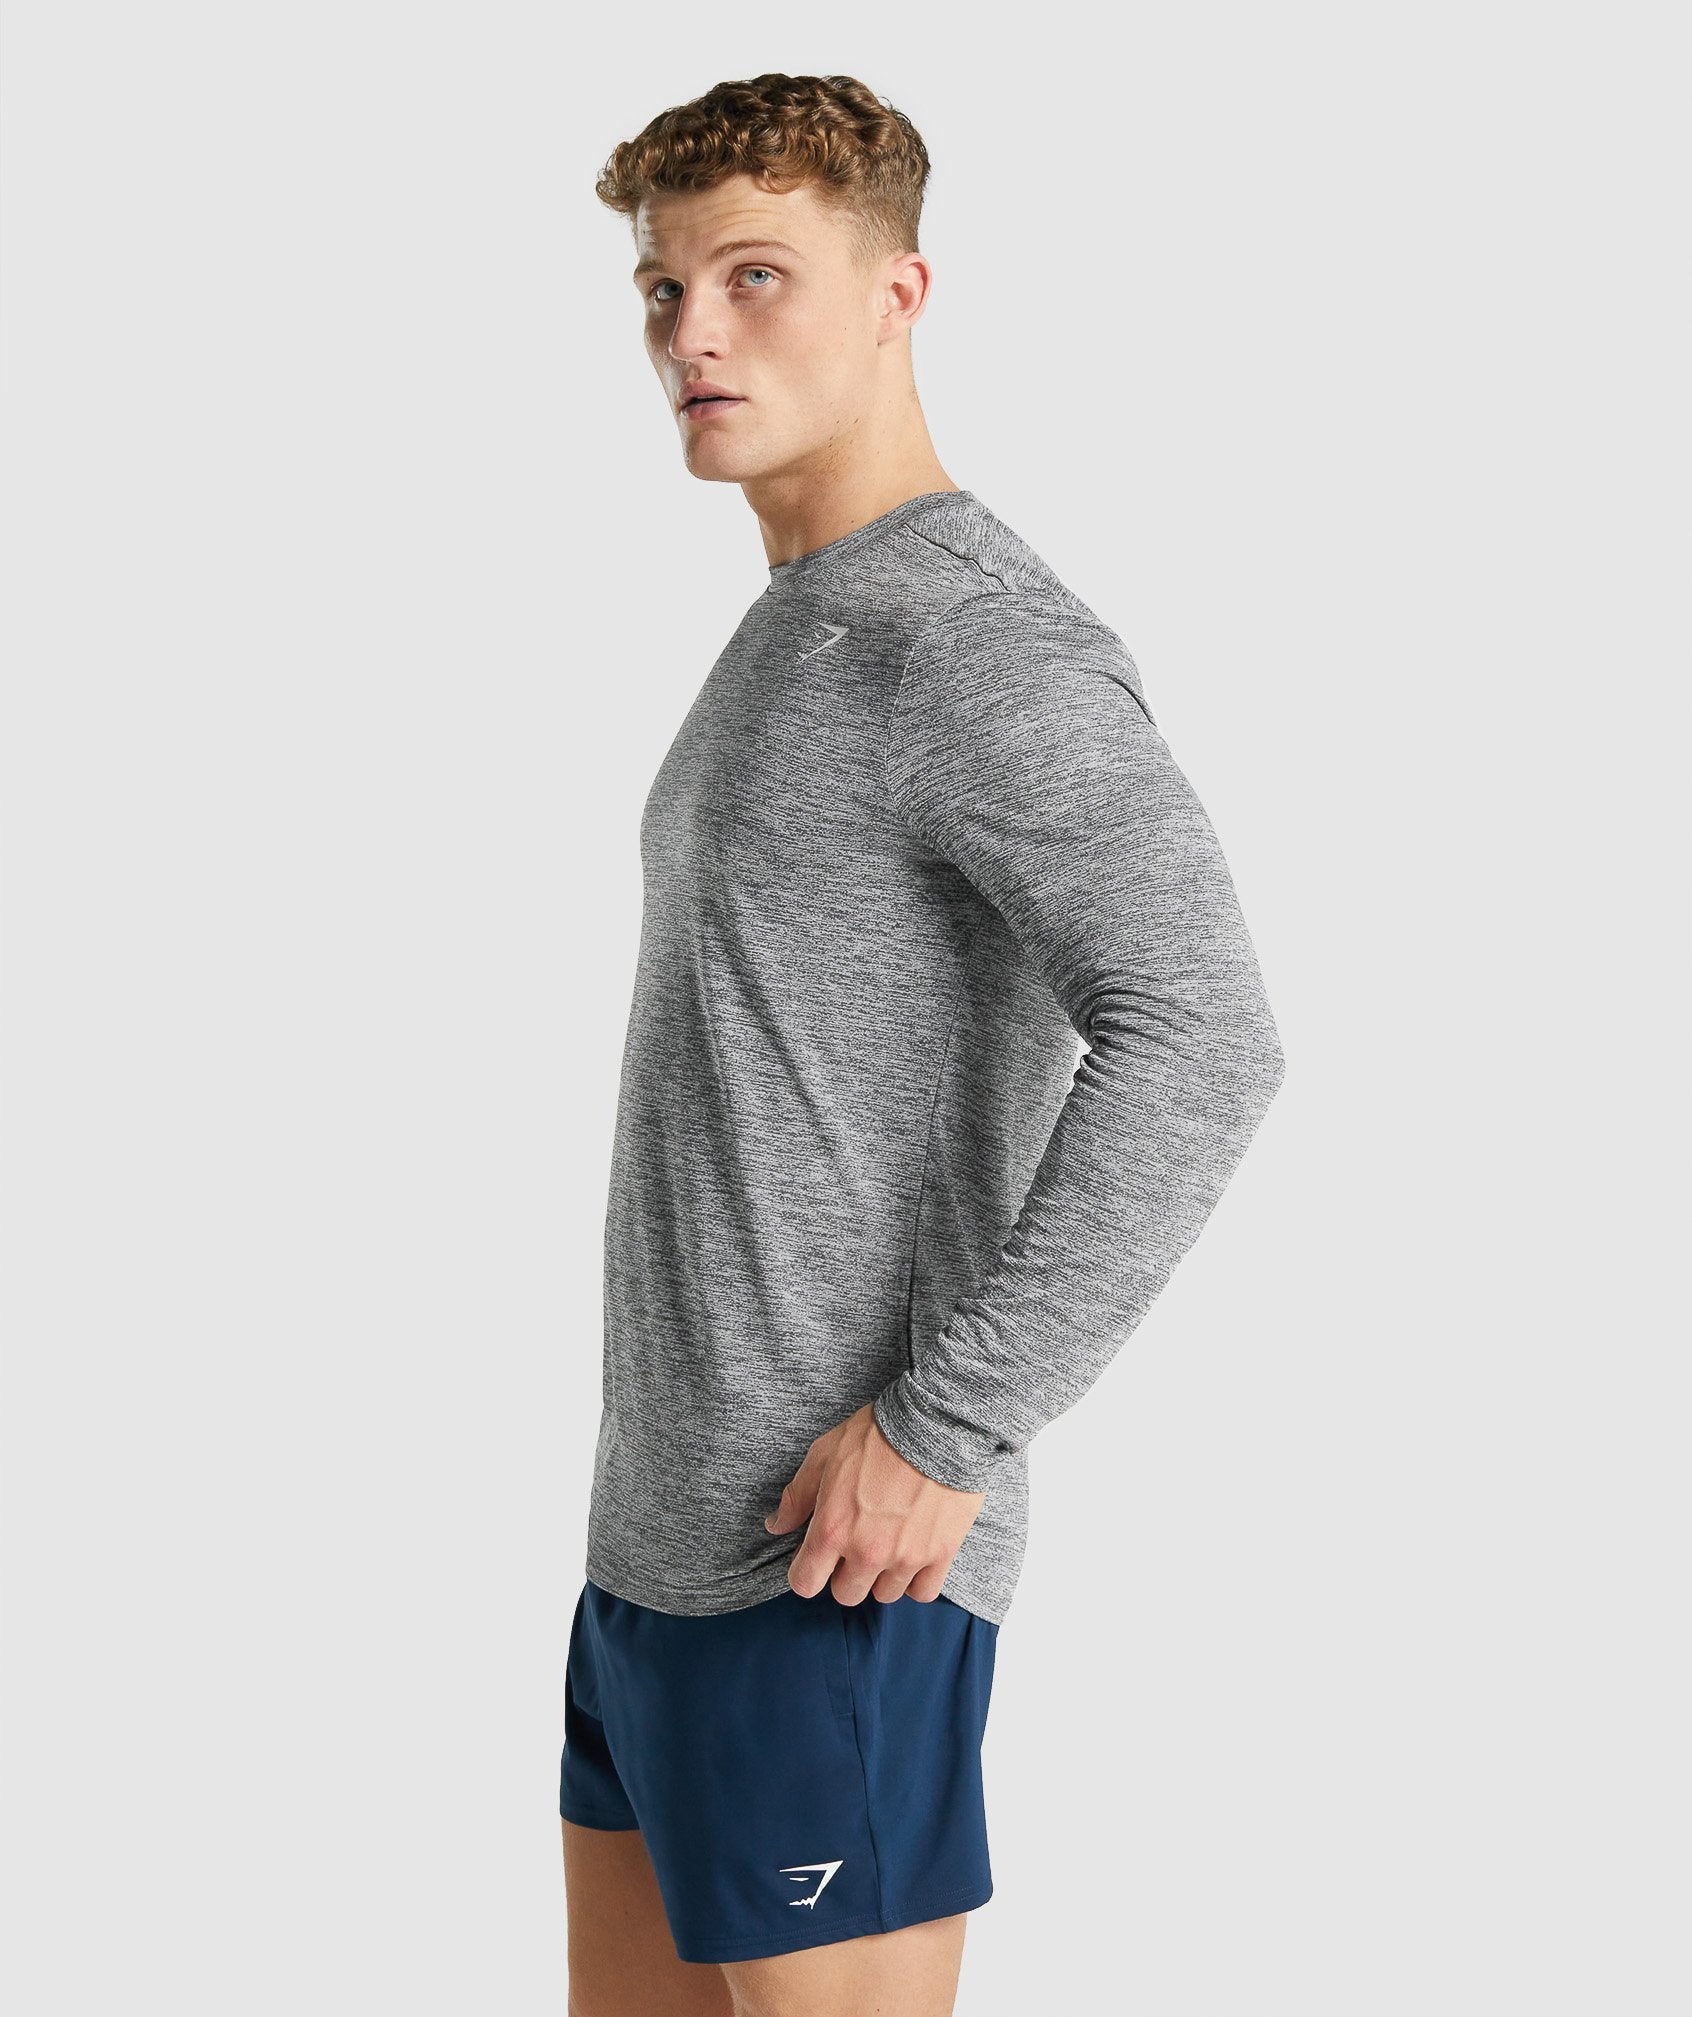 Arrival Marl Long Sleeve T-Shirt in Charcoal Marl - view 3